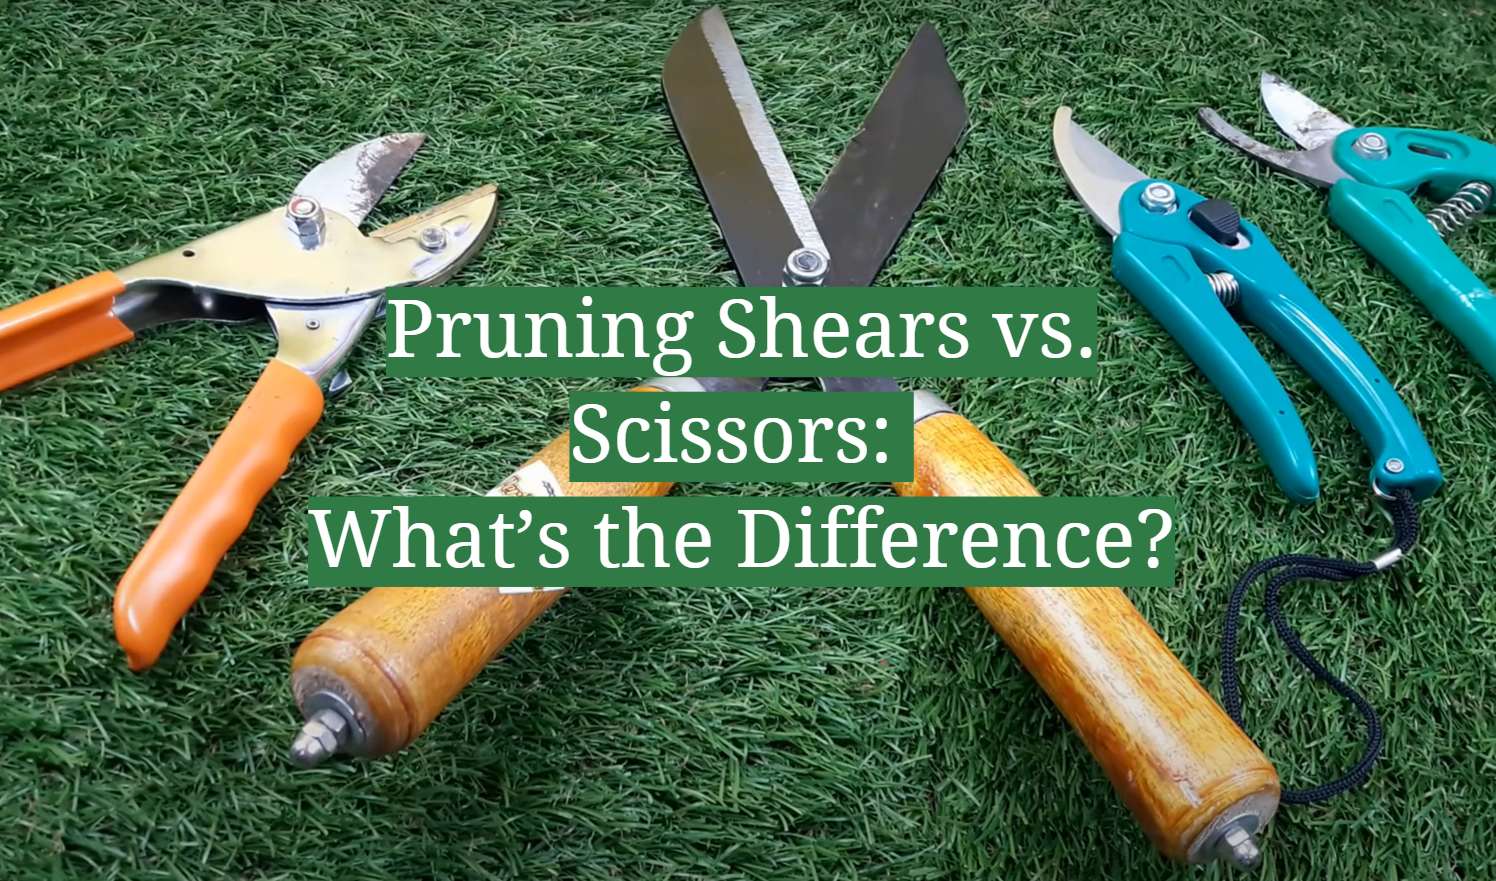 Pruning Shears vs. Scissors: What’s the Difference?